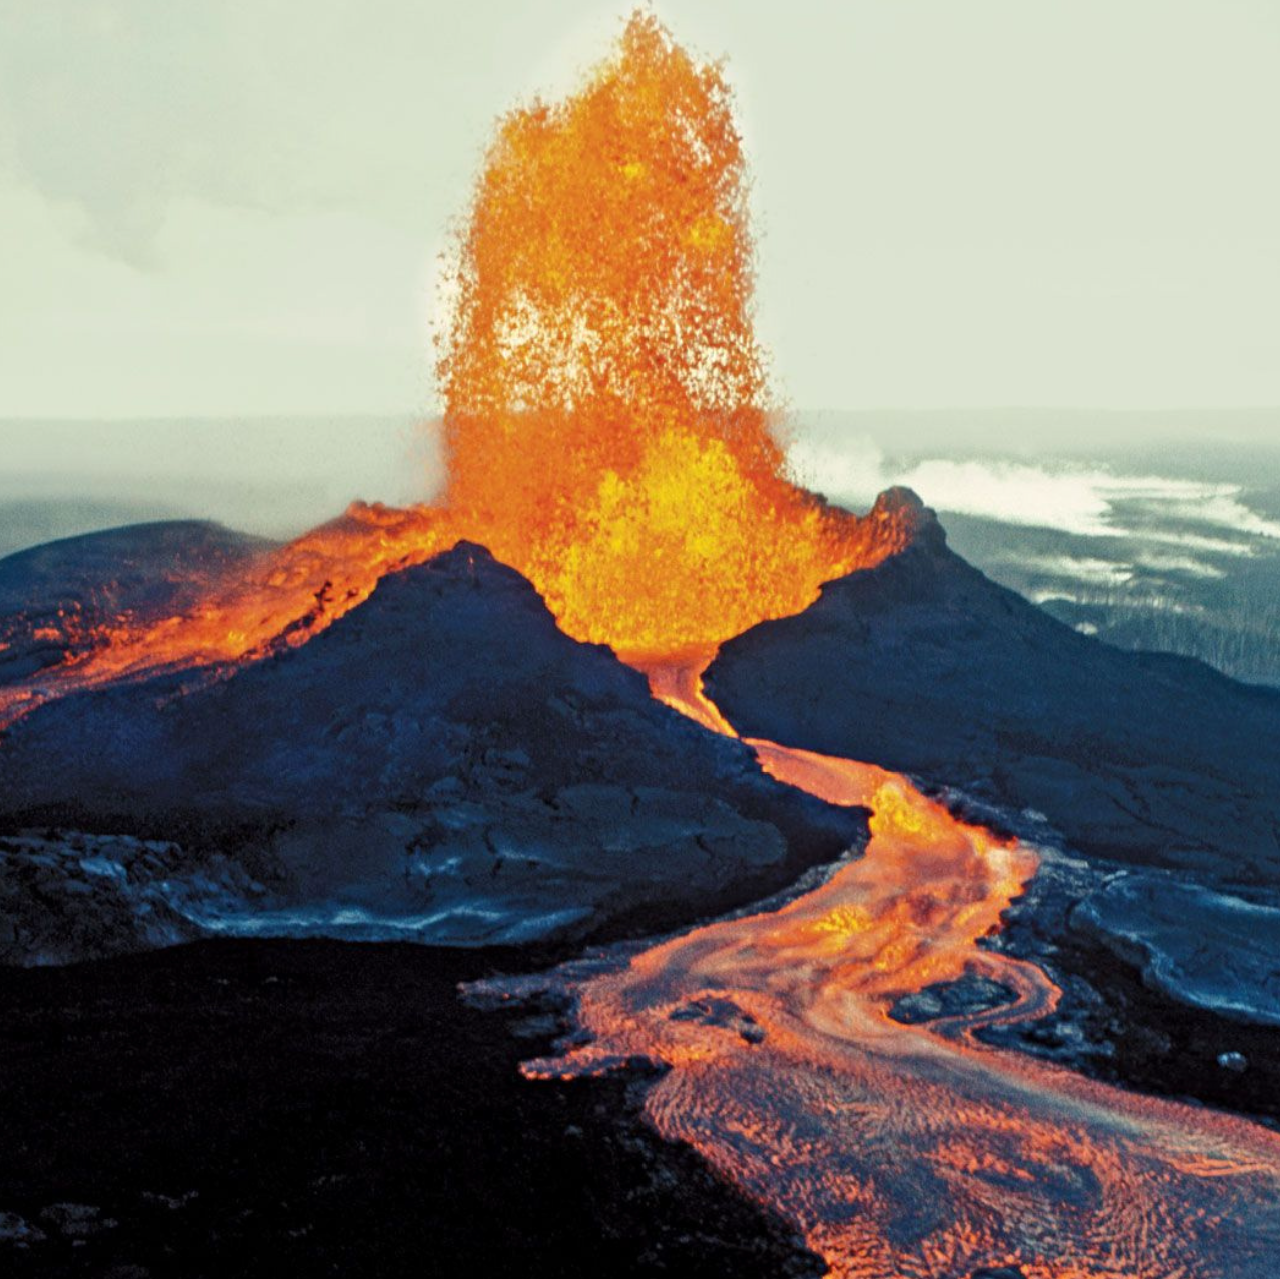 Lava errupts out of a volcano like a geyser and meanders down the mountain